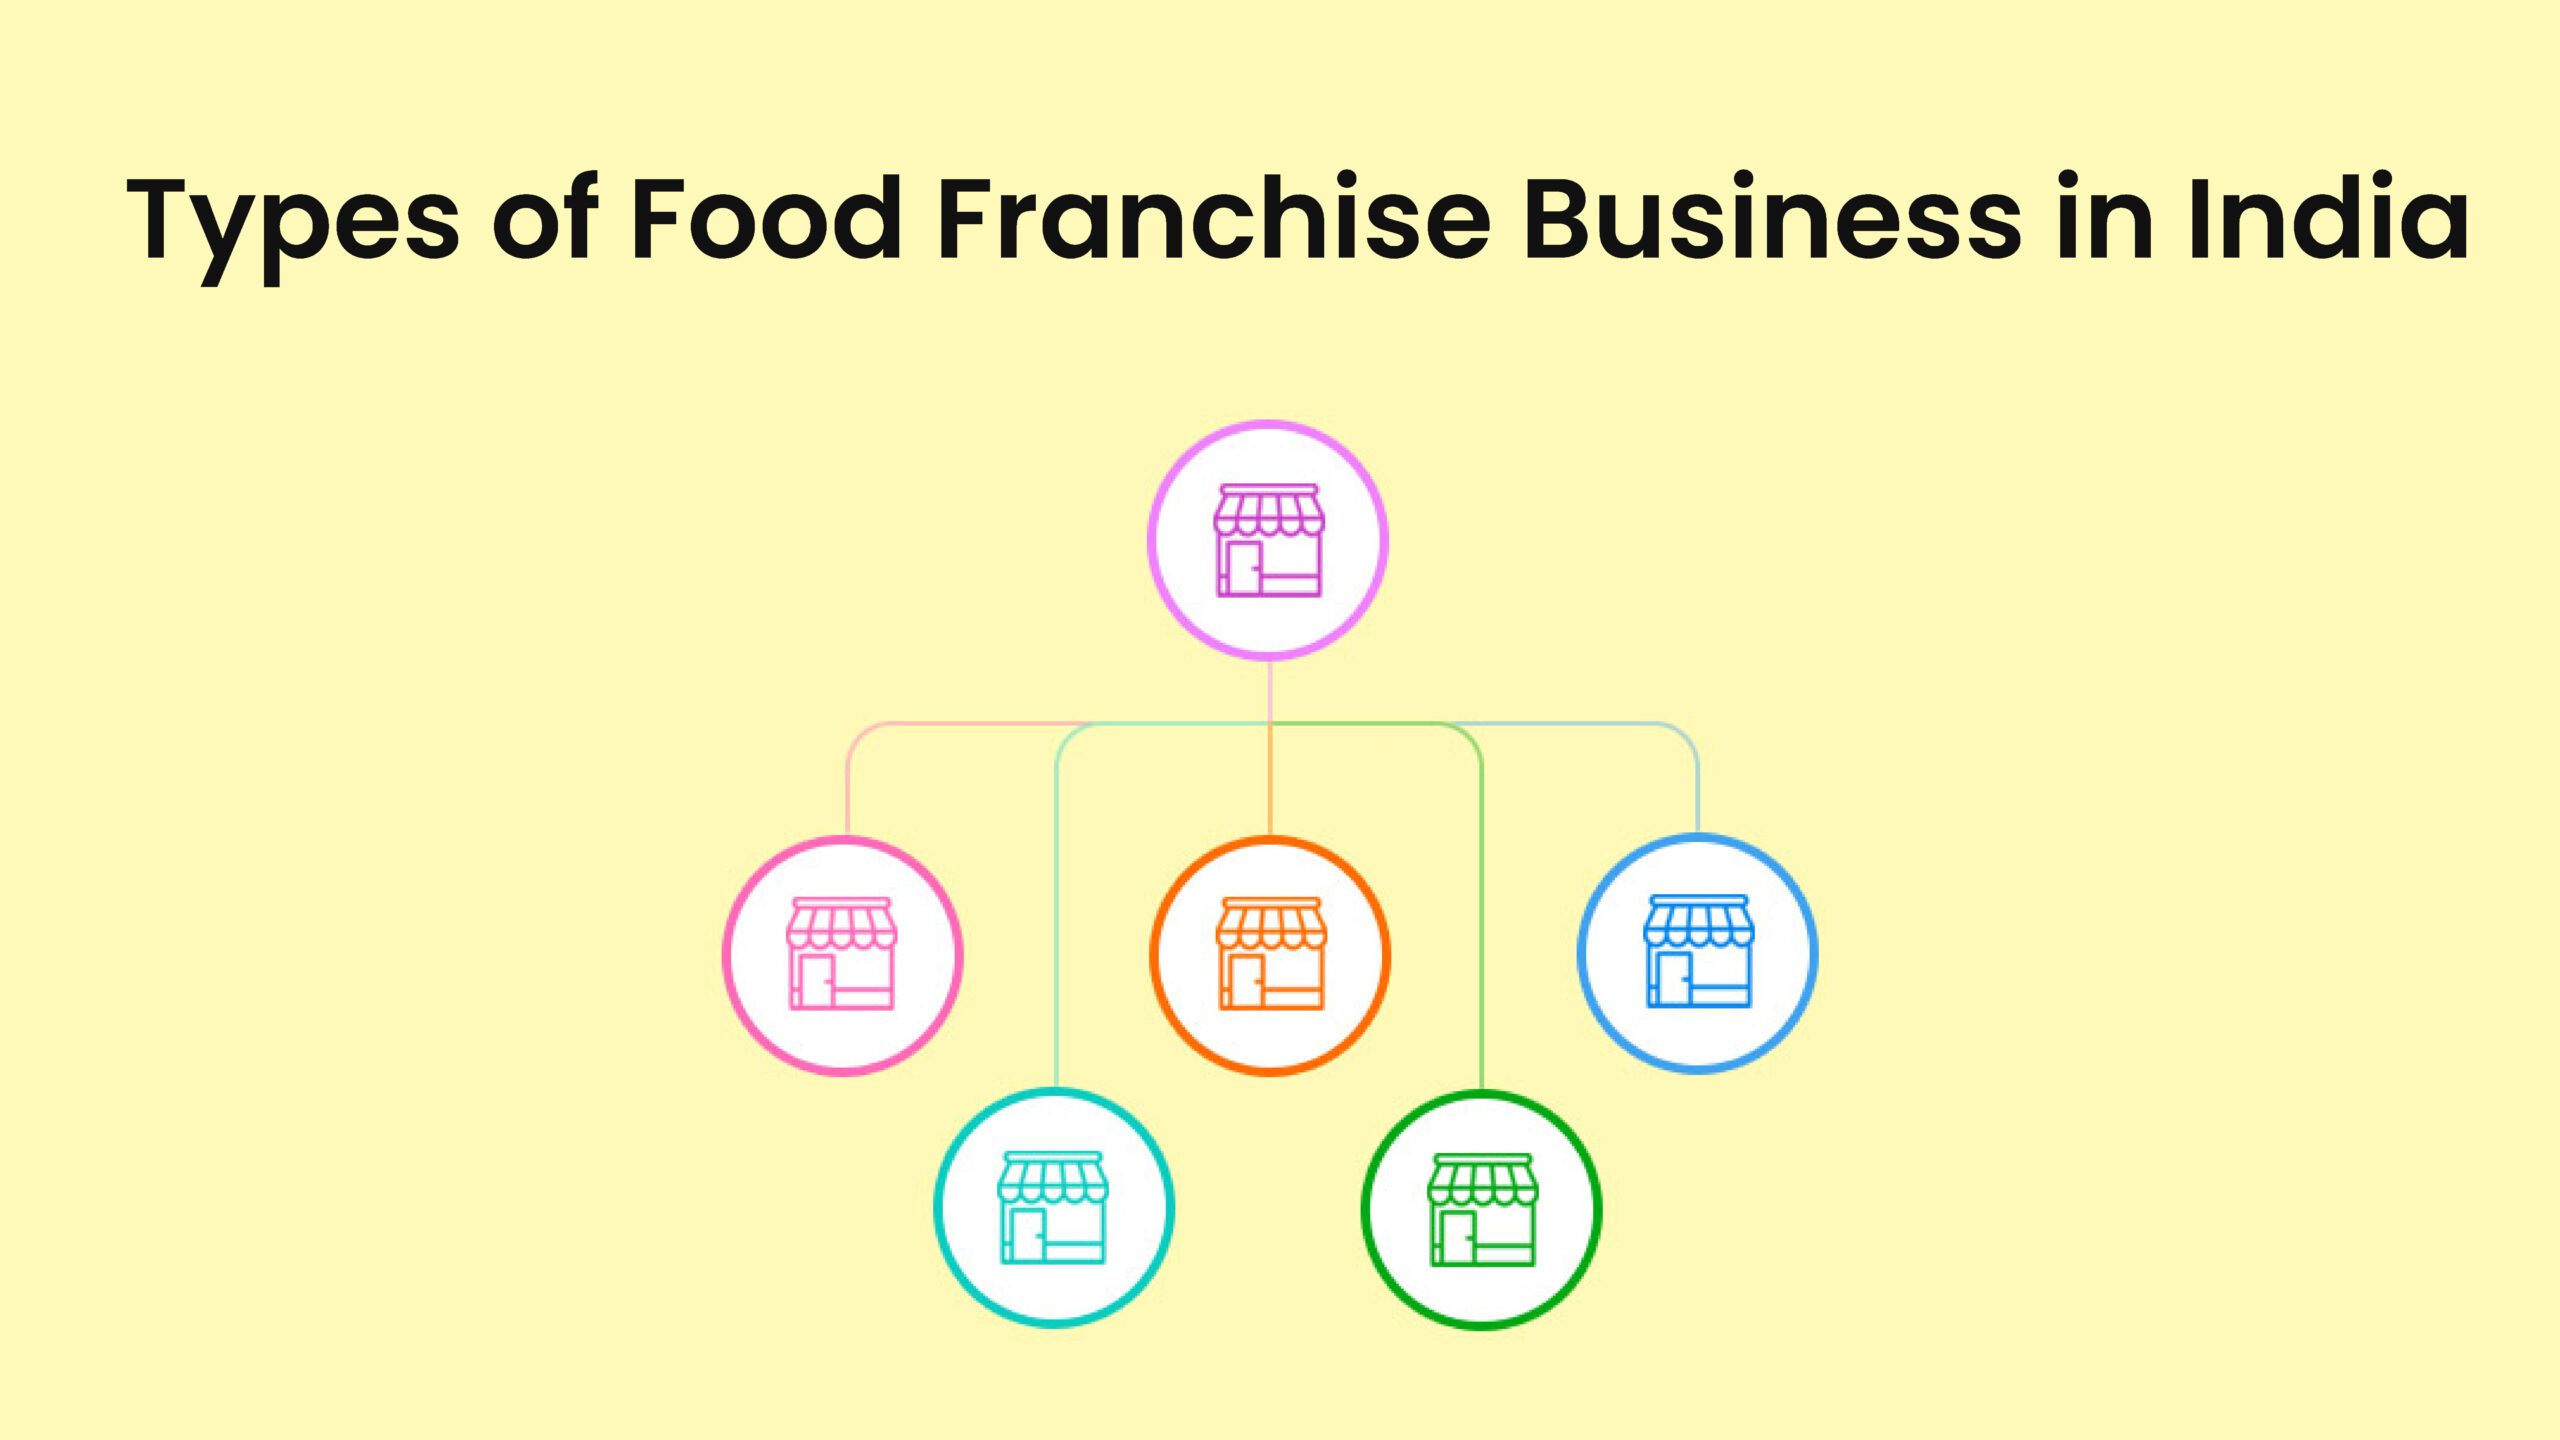 Types of food franchise business in India